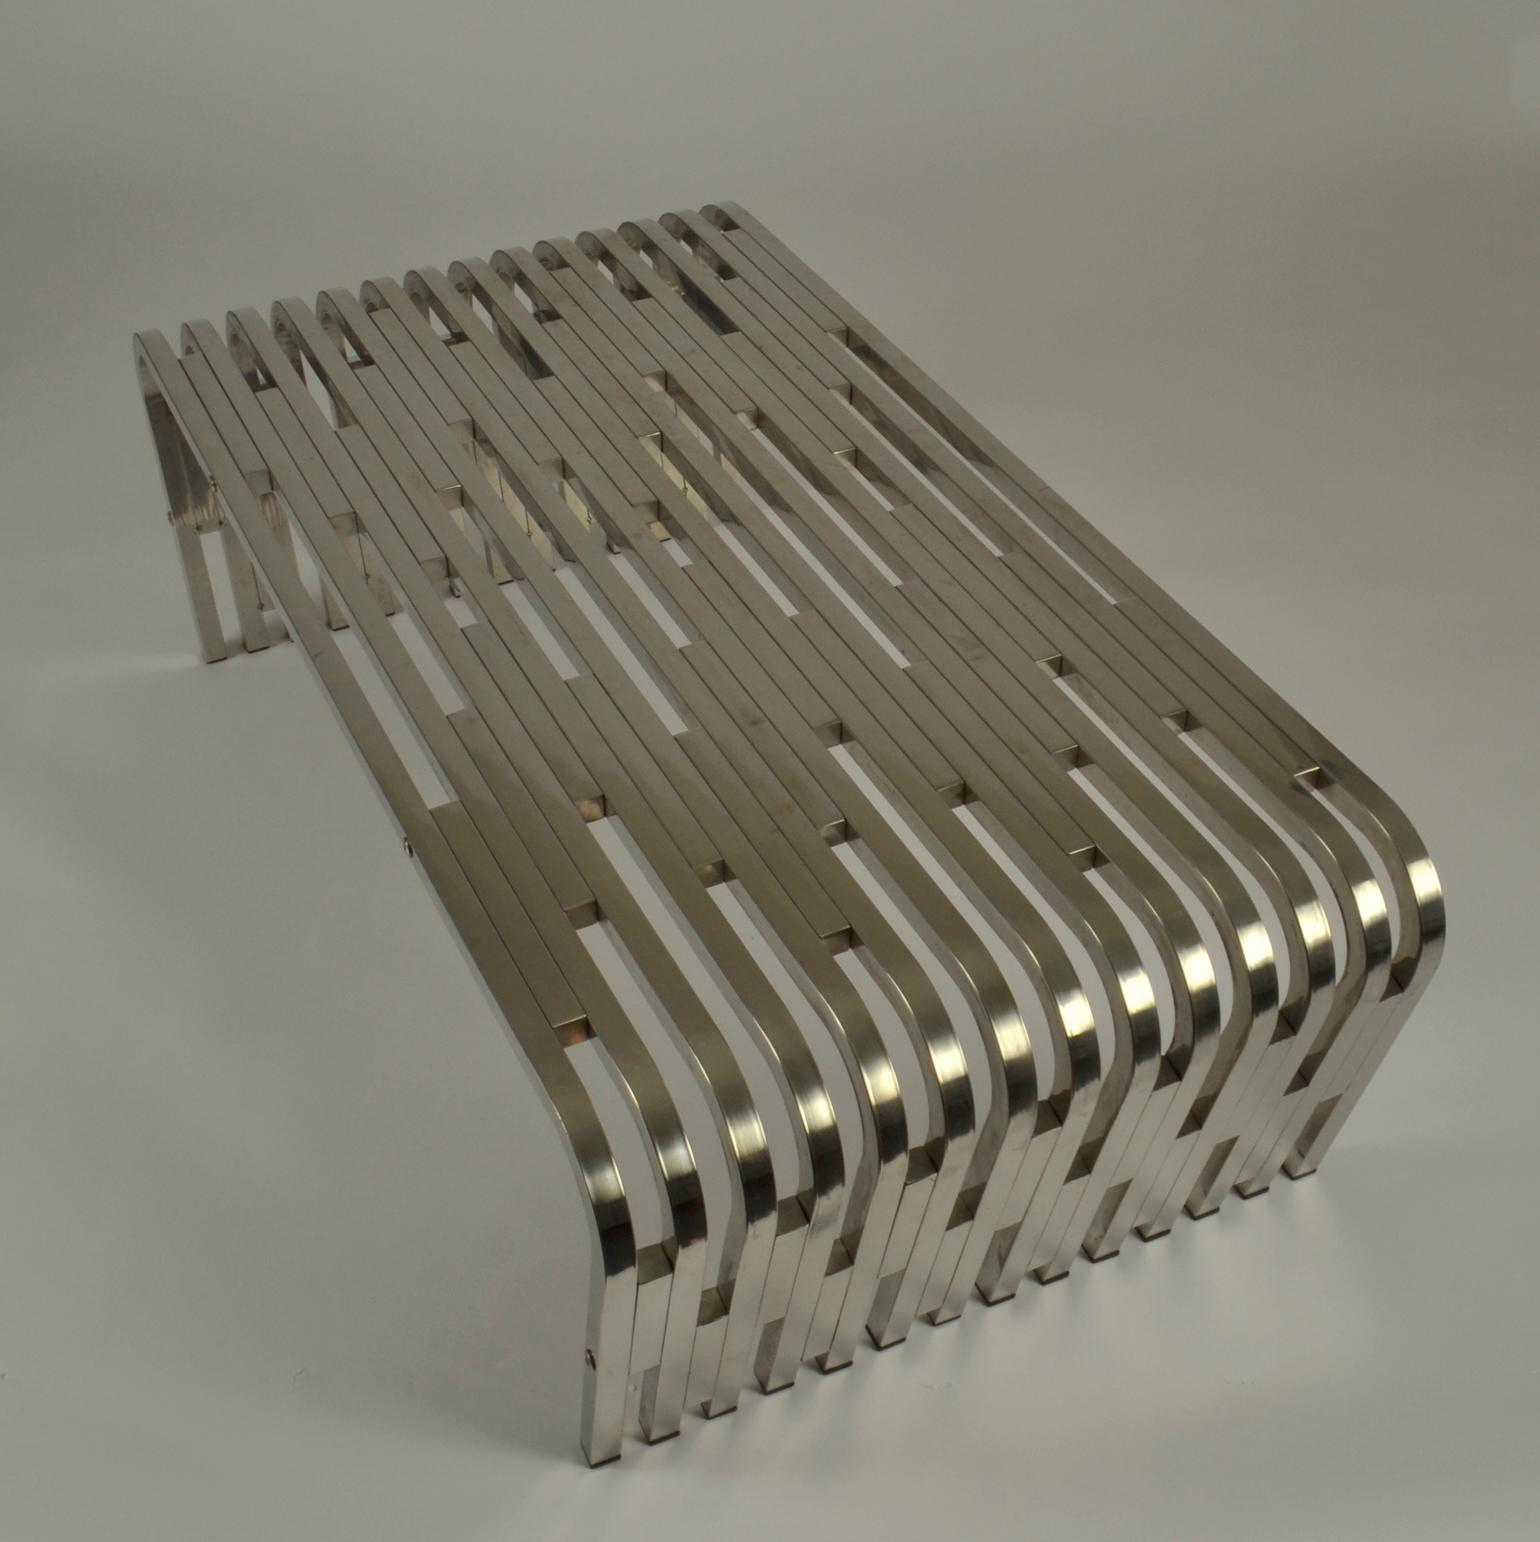 Large sculptural stainless steel coffee table is made out of extruded boxed stainless steel  segments. The steel is crafted into  different lengths, assembled and then riveted together to form this art table. The table is then bent into  a ‘U’